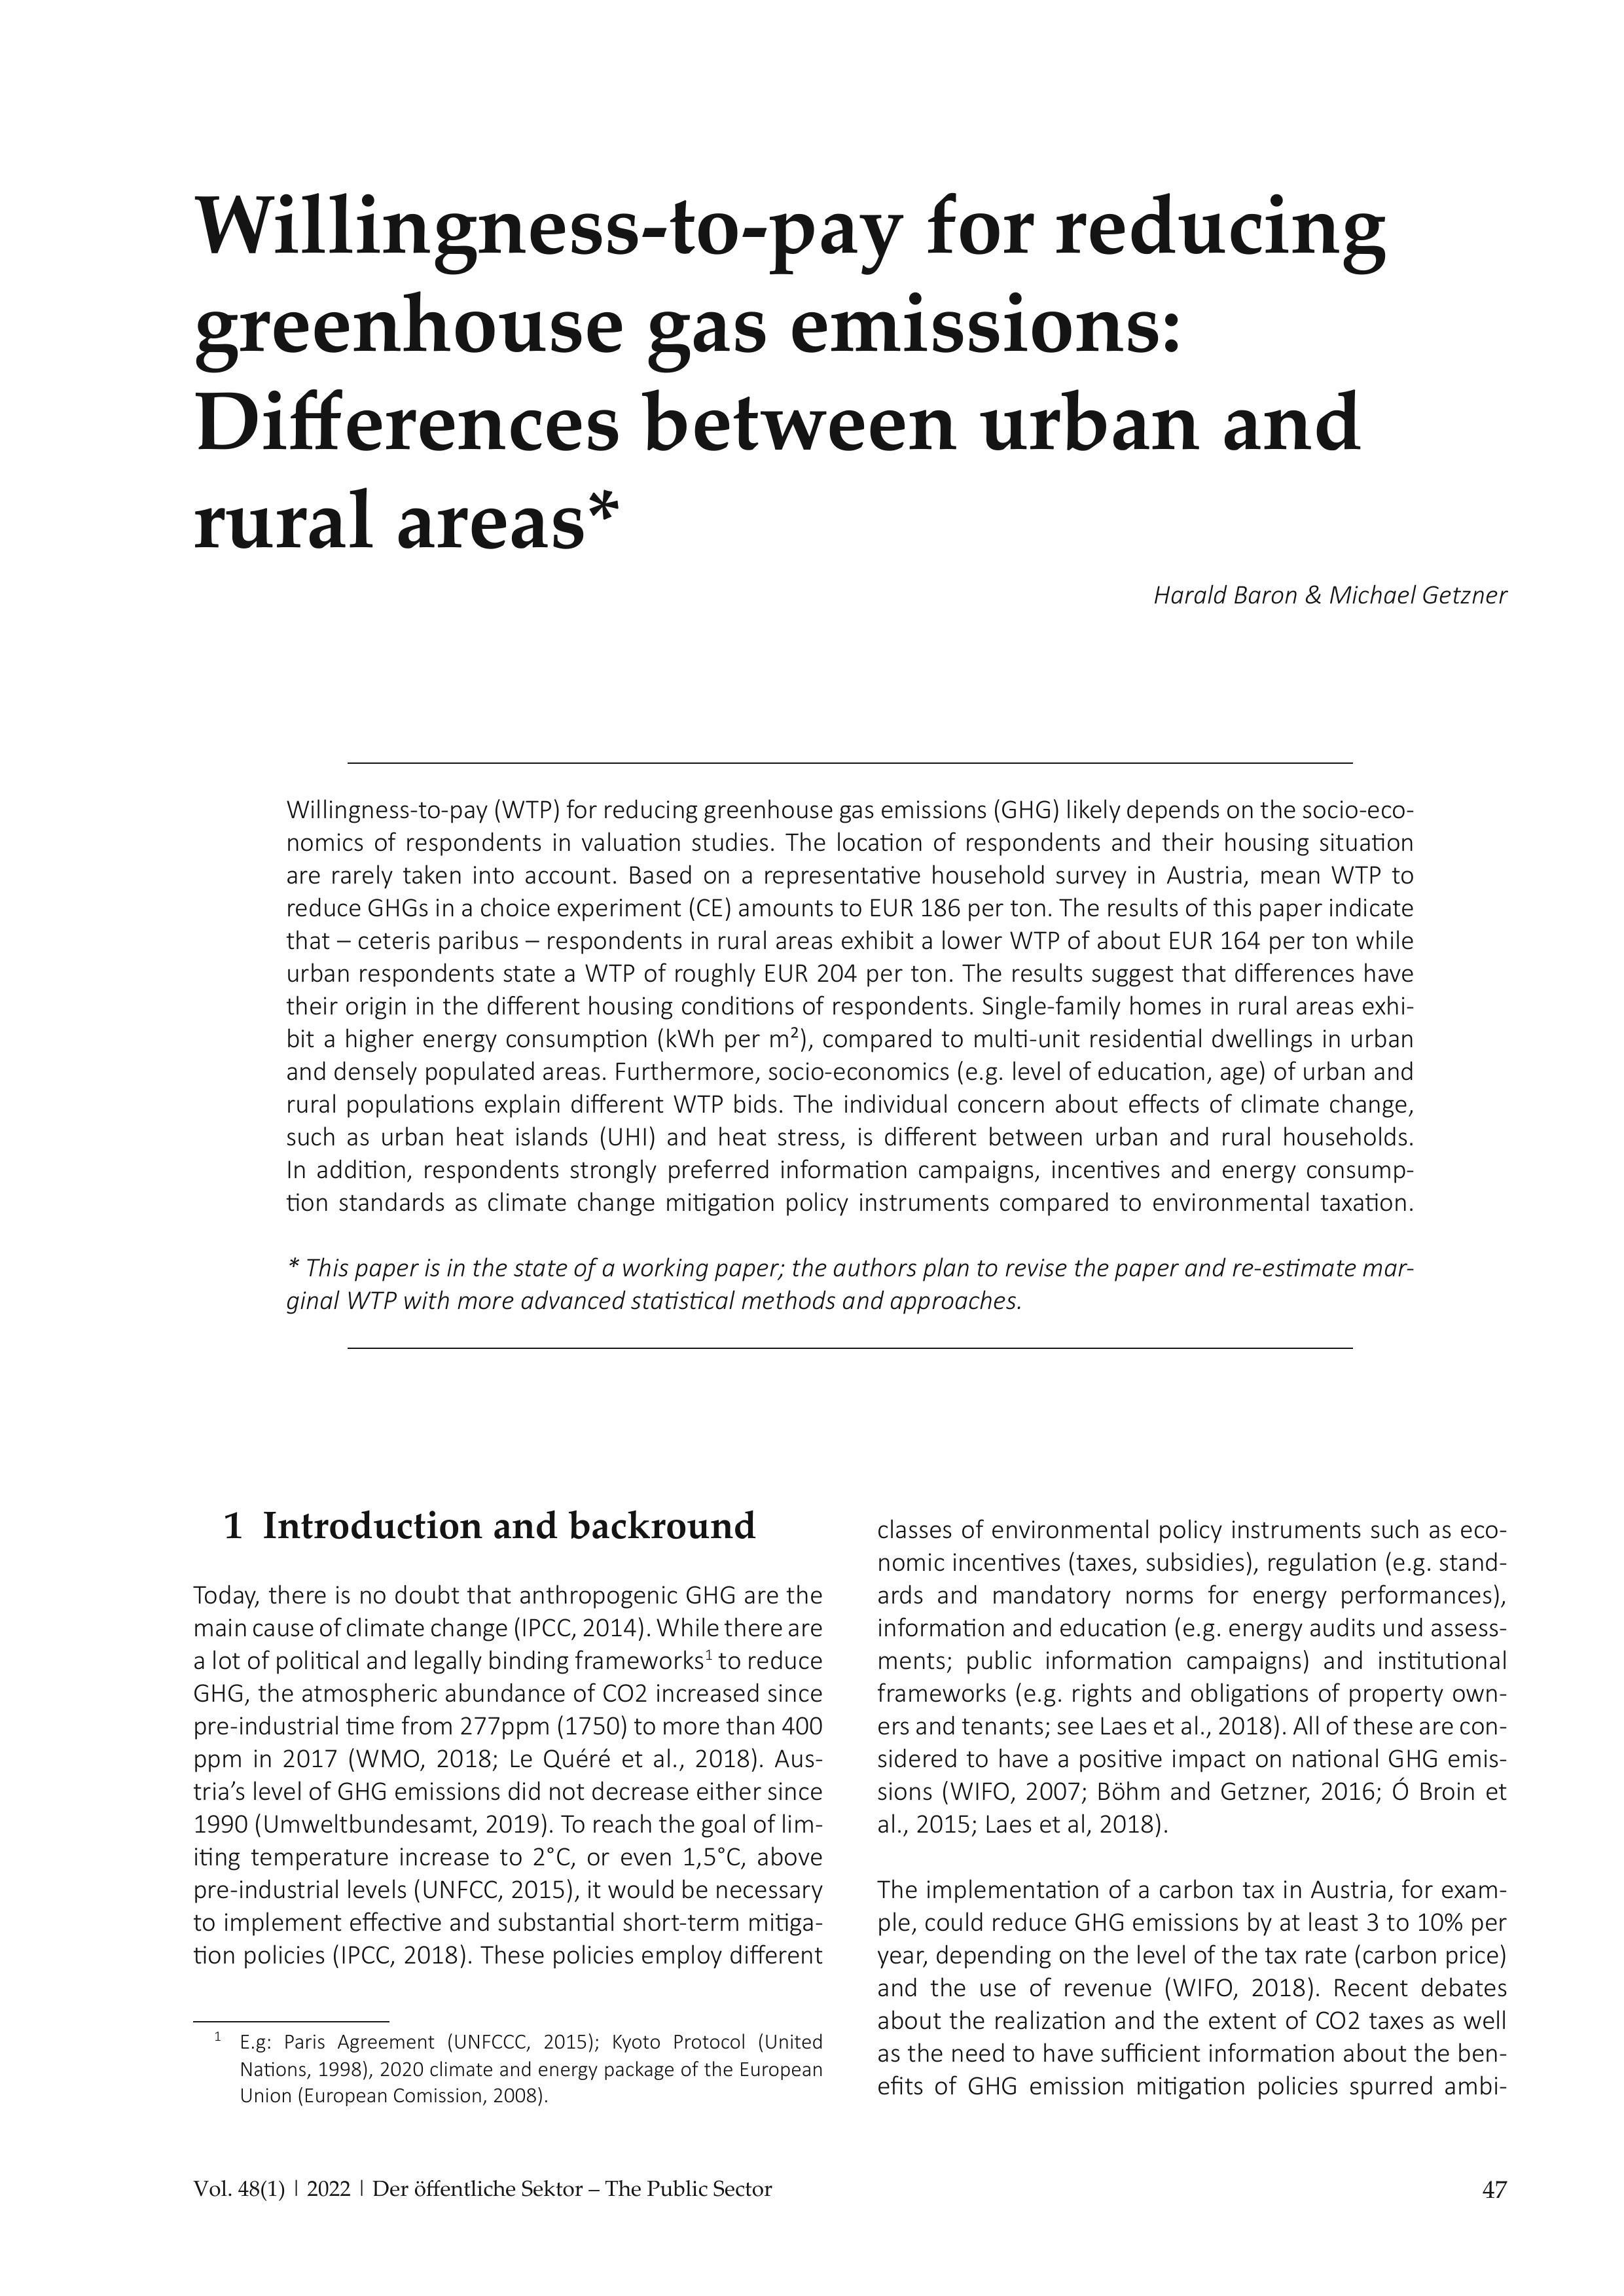 Willingness-to-pay for reducing greenhouse gas emissions: Differences between urban and rural areas